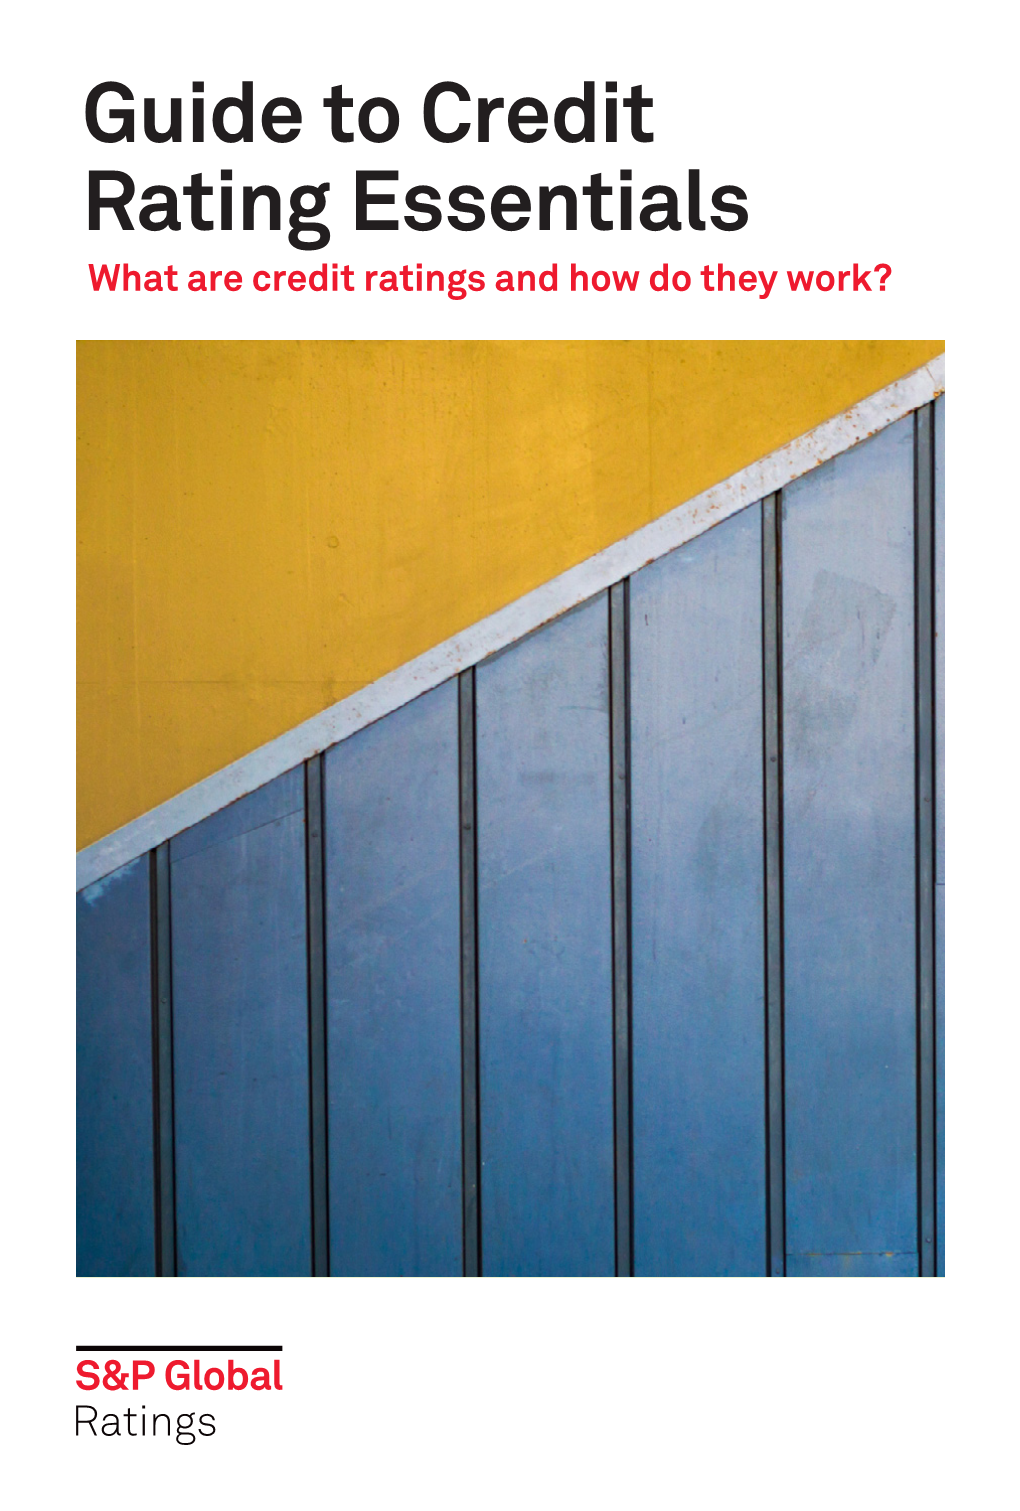 Guide to Credit Rating Essentials What Are Credit Ratings and How Do They Work? Guide to Credit Rating Essentials